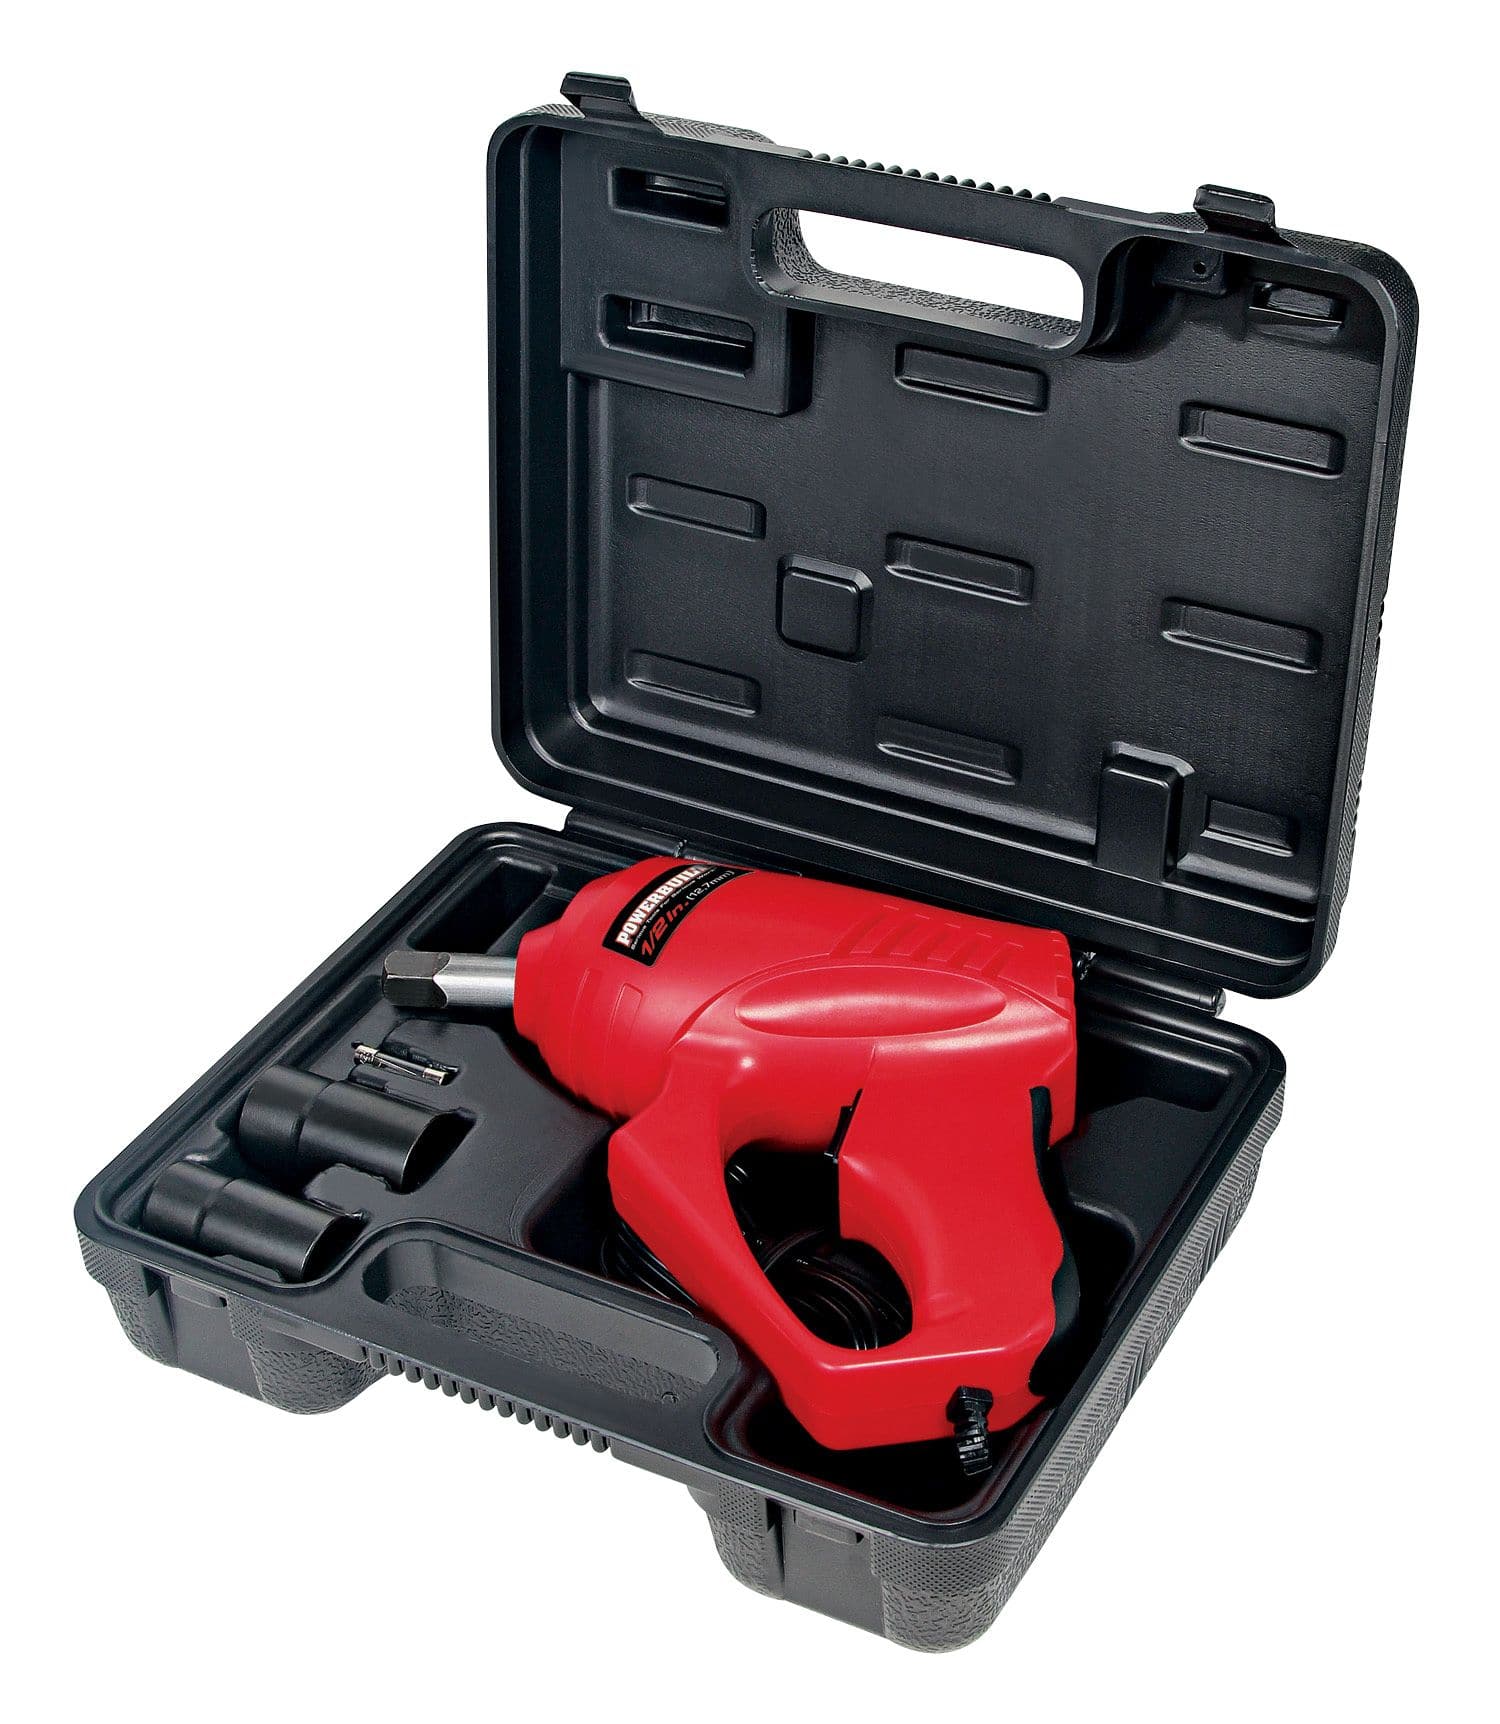 Powerbuilt 12V Programmable Impact Wrench | Canadian Tire